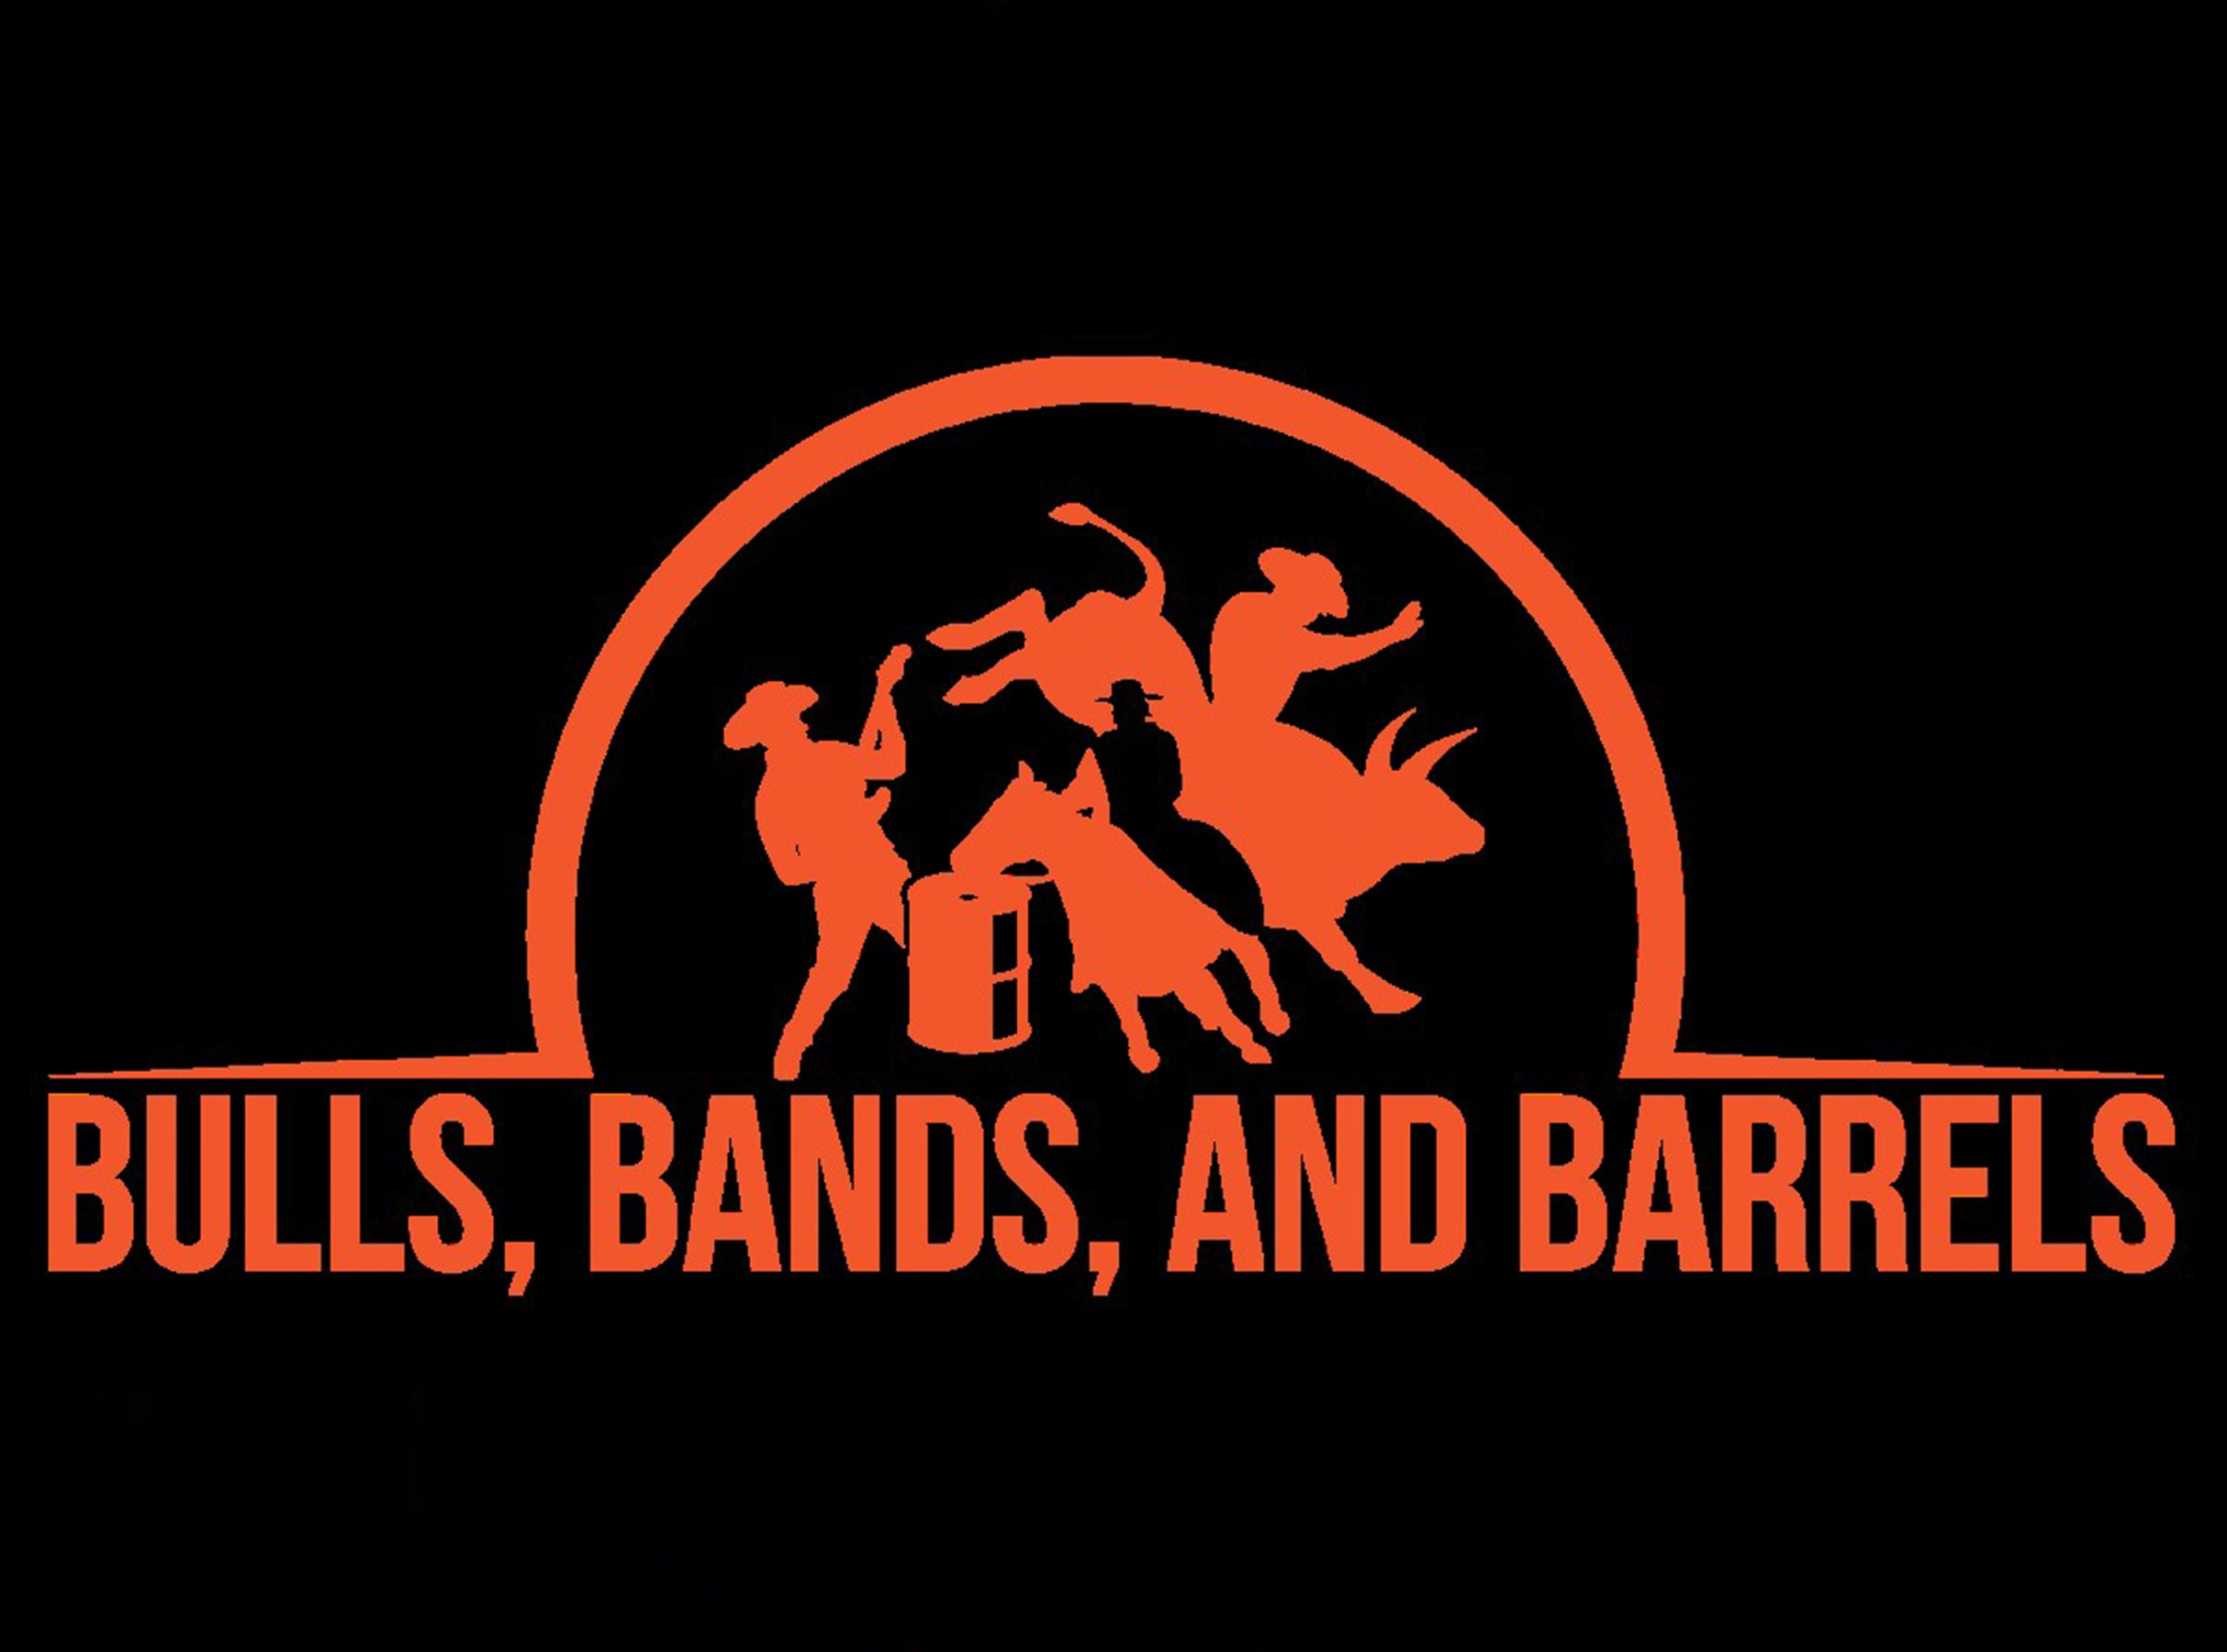 Bulls, Bands, And Barrels Featuring Ian Munsick & Gavin Adcock in Alexandria promo photo for Official Platinum presale offer code